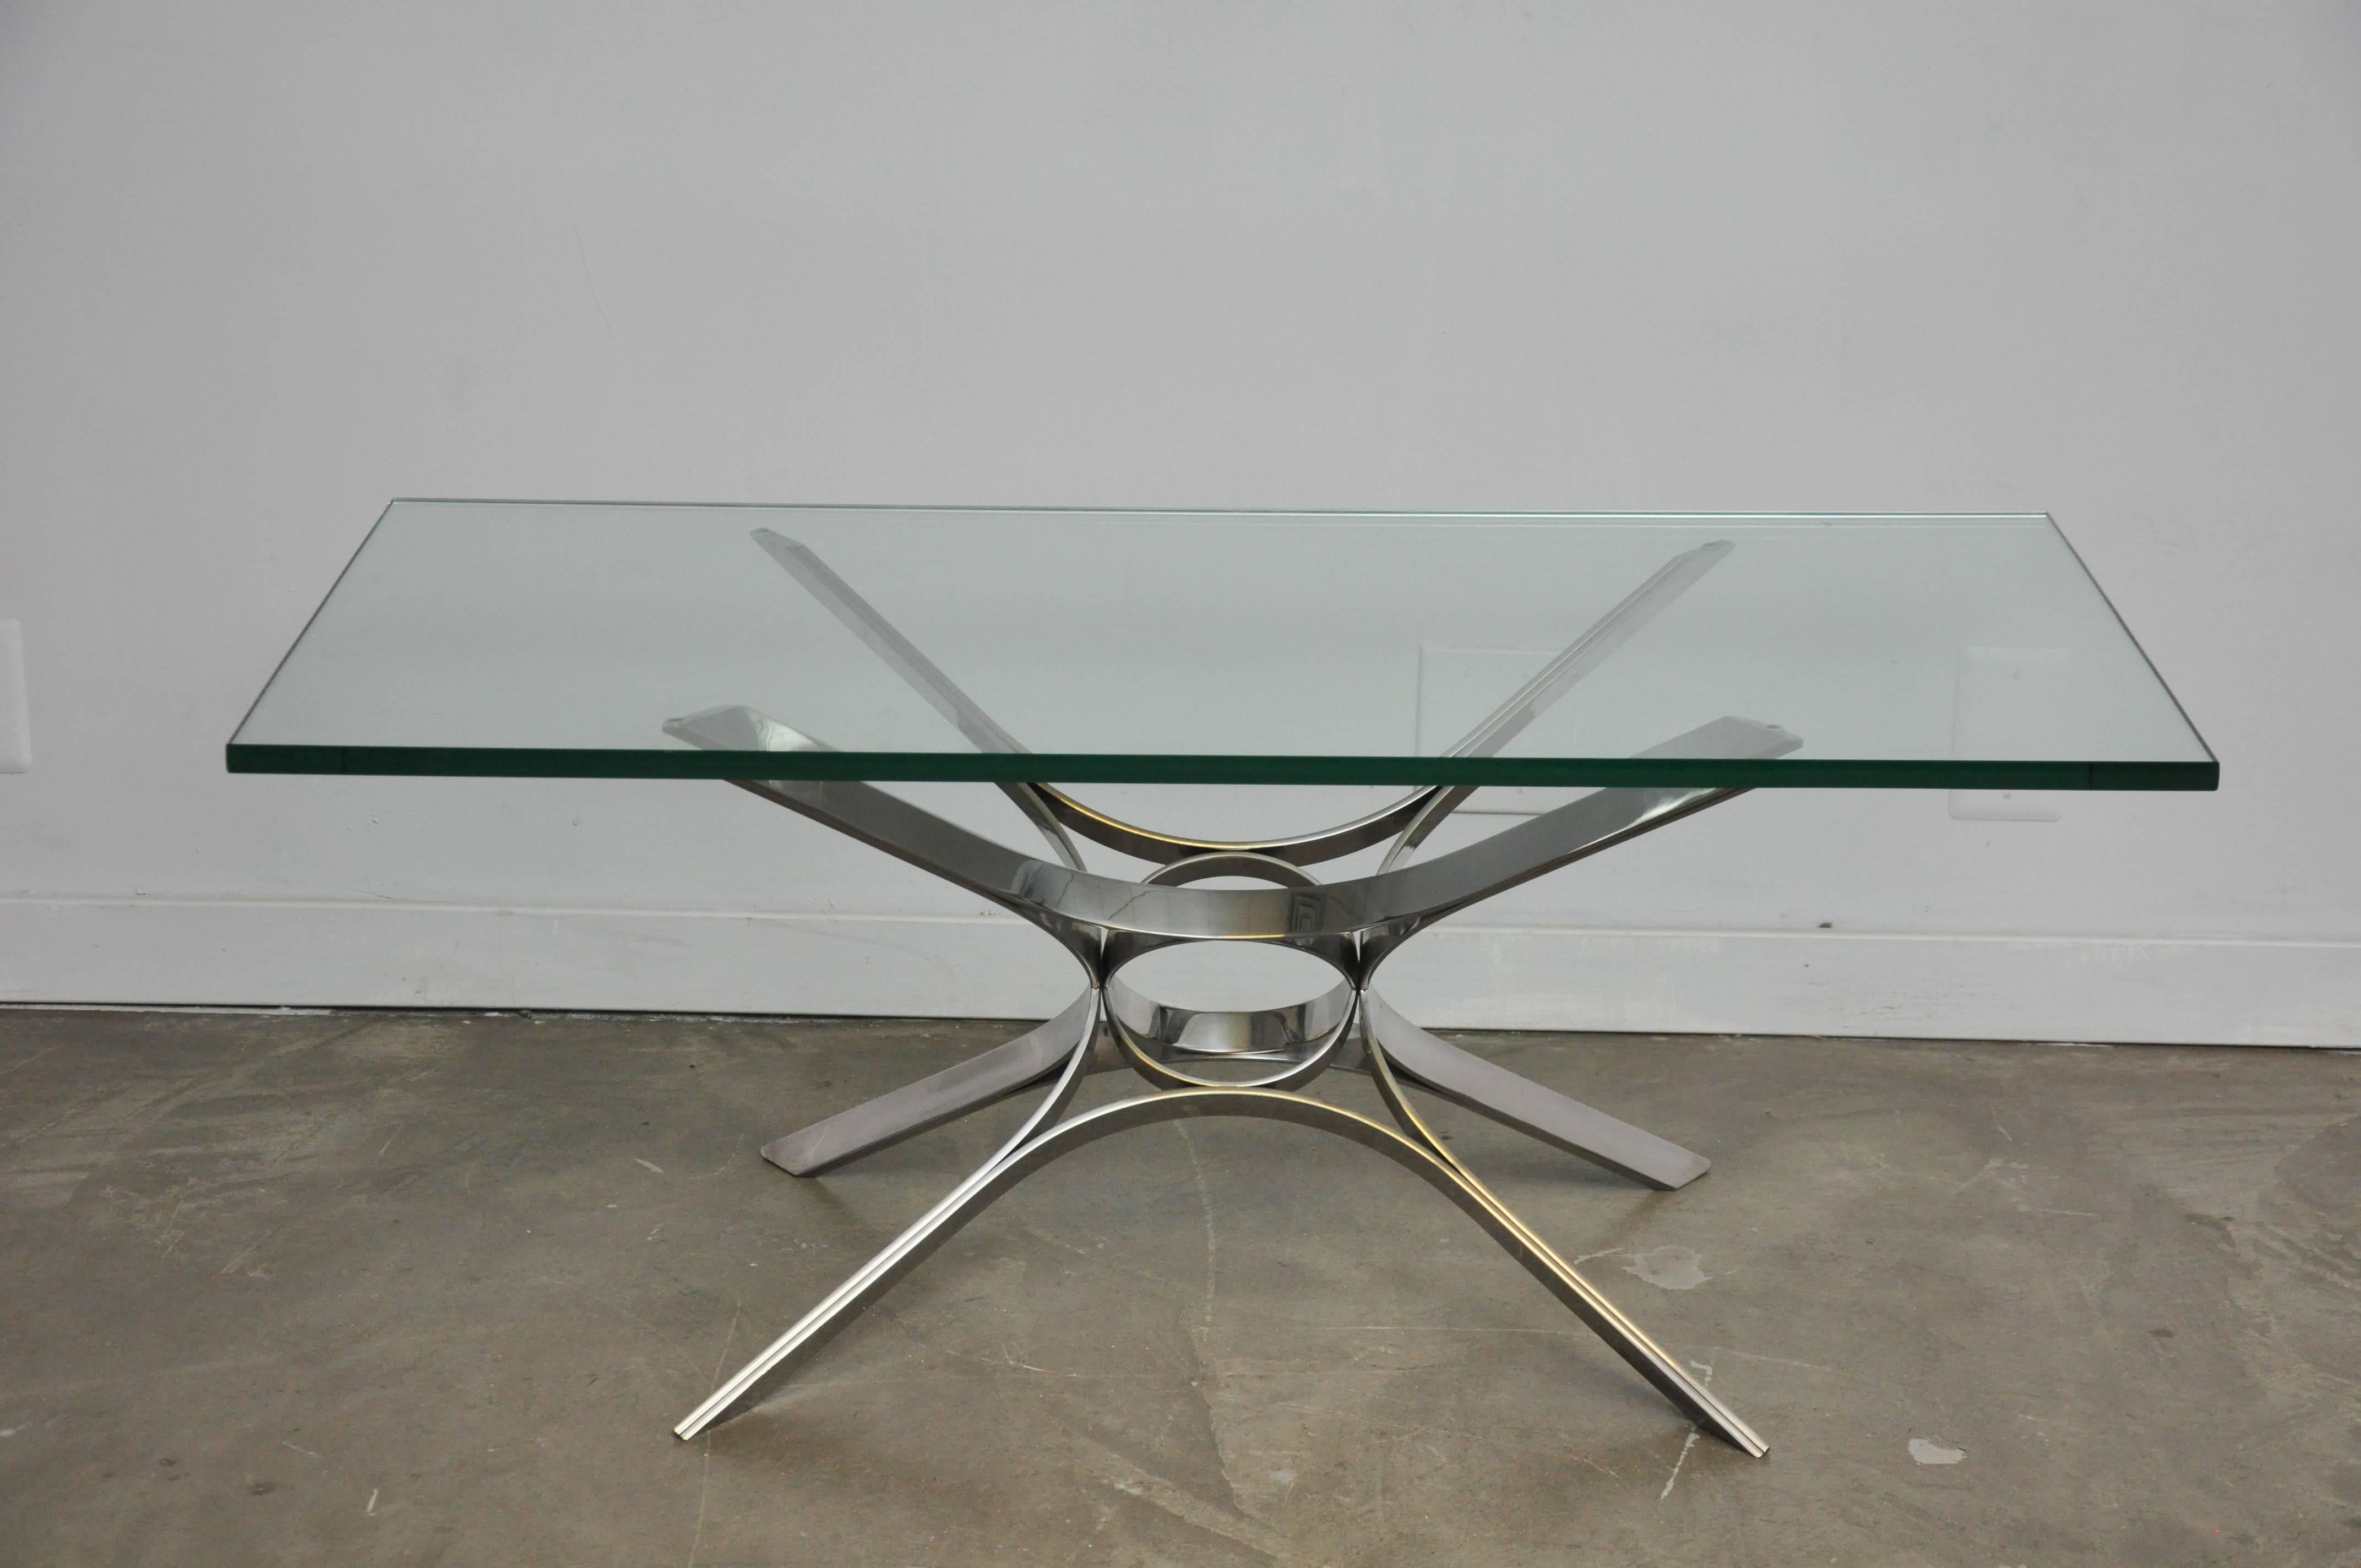 Sculptural form chrome base coffee table with glass top. Designed by Roger Sprunger for Dunbar, circa 1970s.